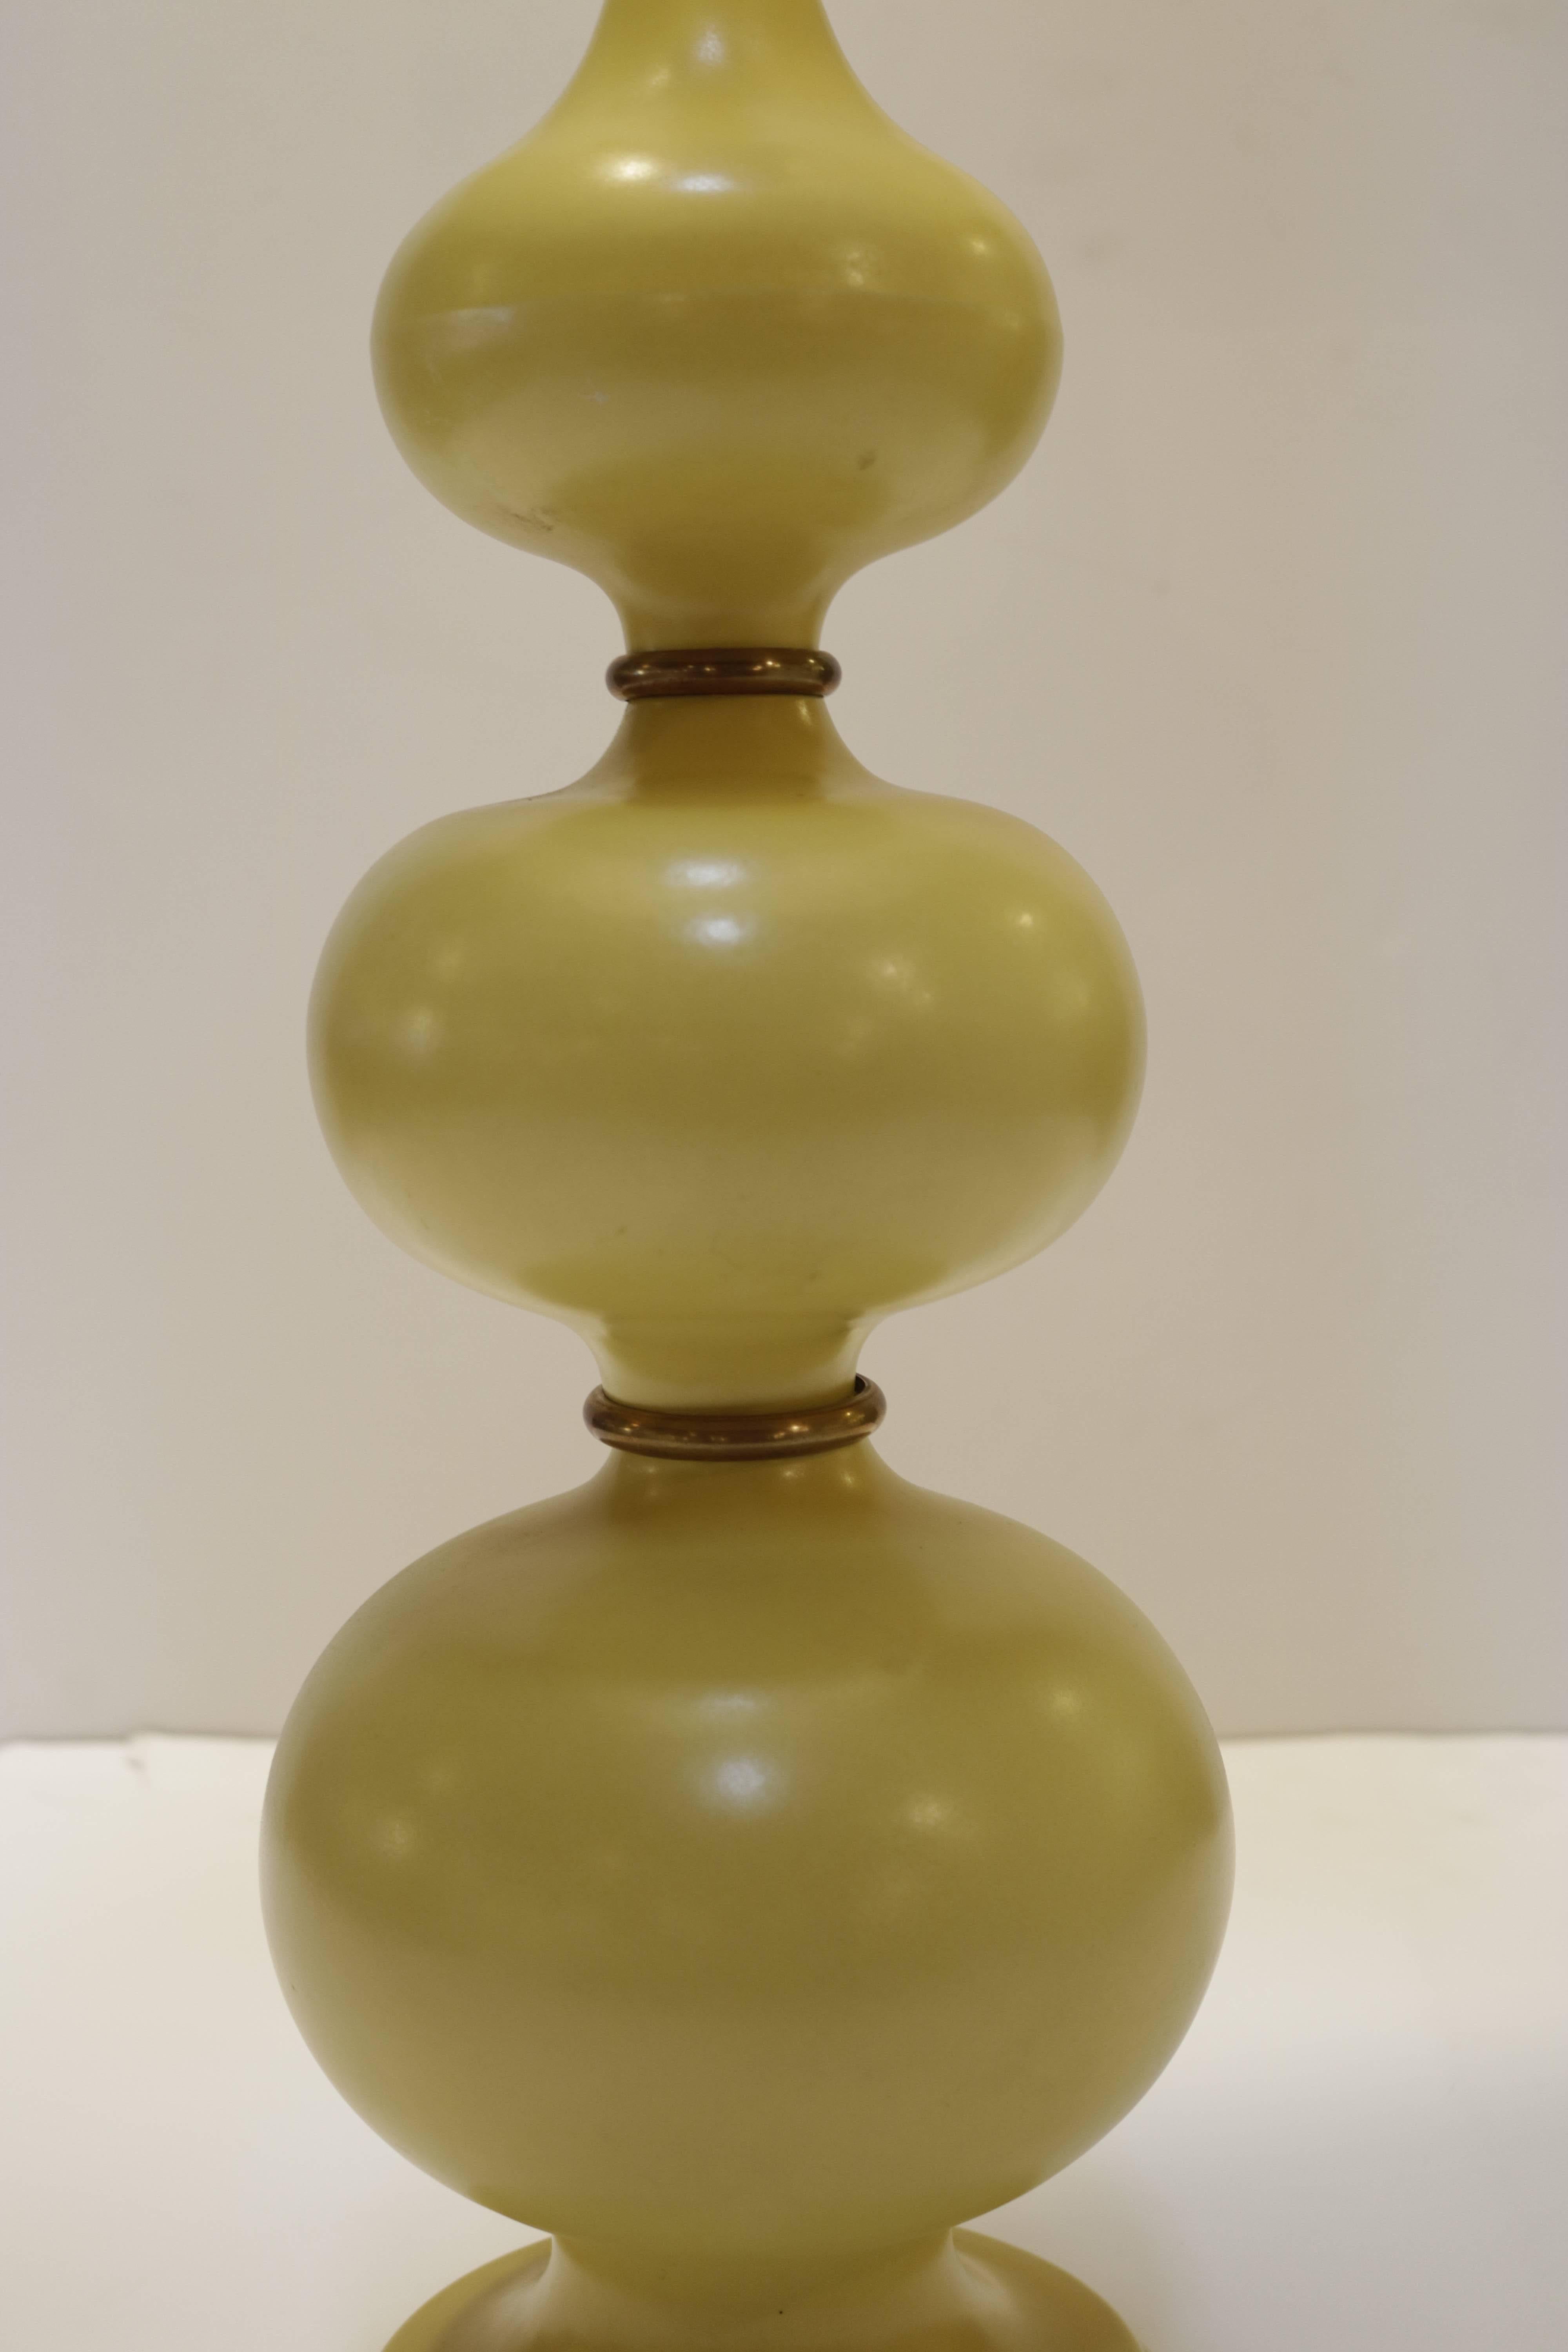 This 1950s atomic lamp is constructed with three porcelain bulbs and brass rings, fittings and original finial. Original beautiful warm yellow finish. Measures: Shade is 18.0 height x 16.0 inches diameter.